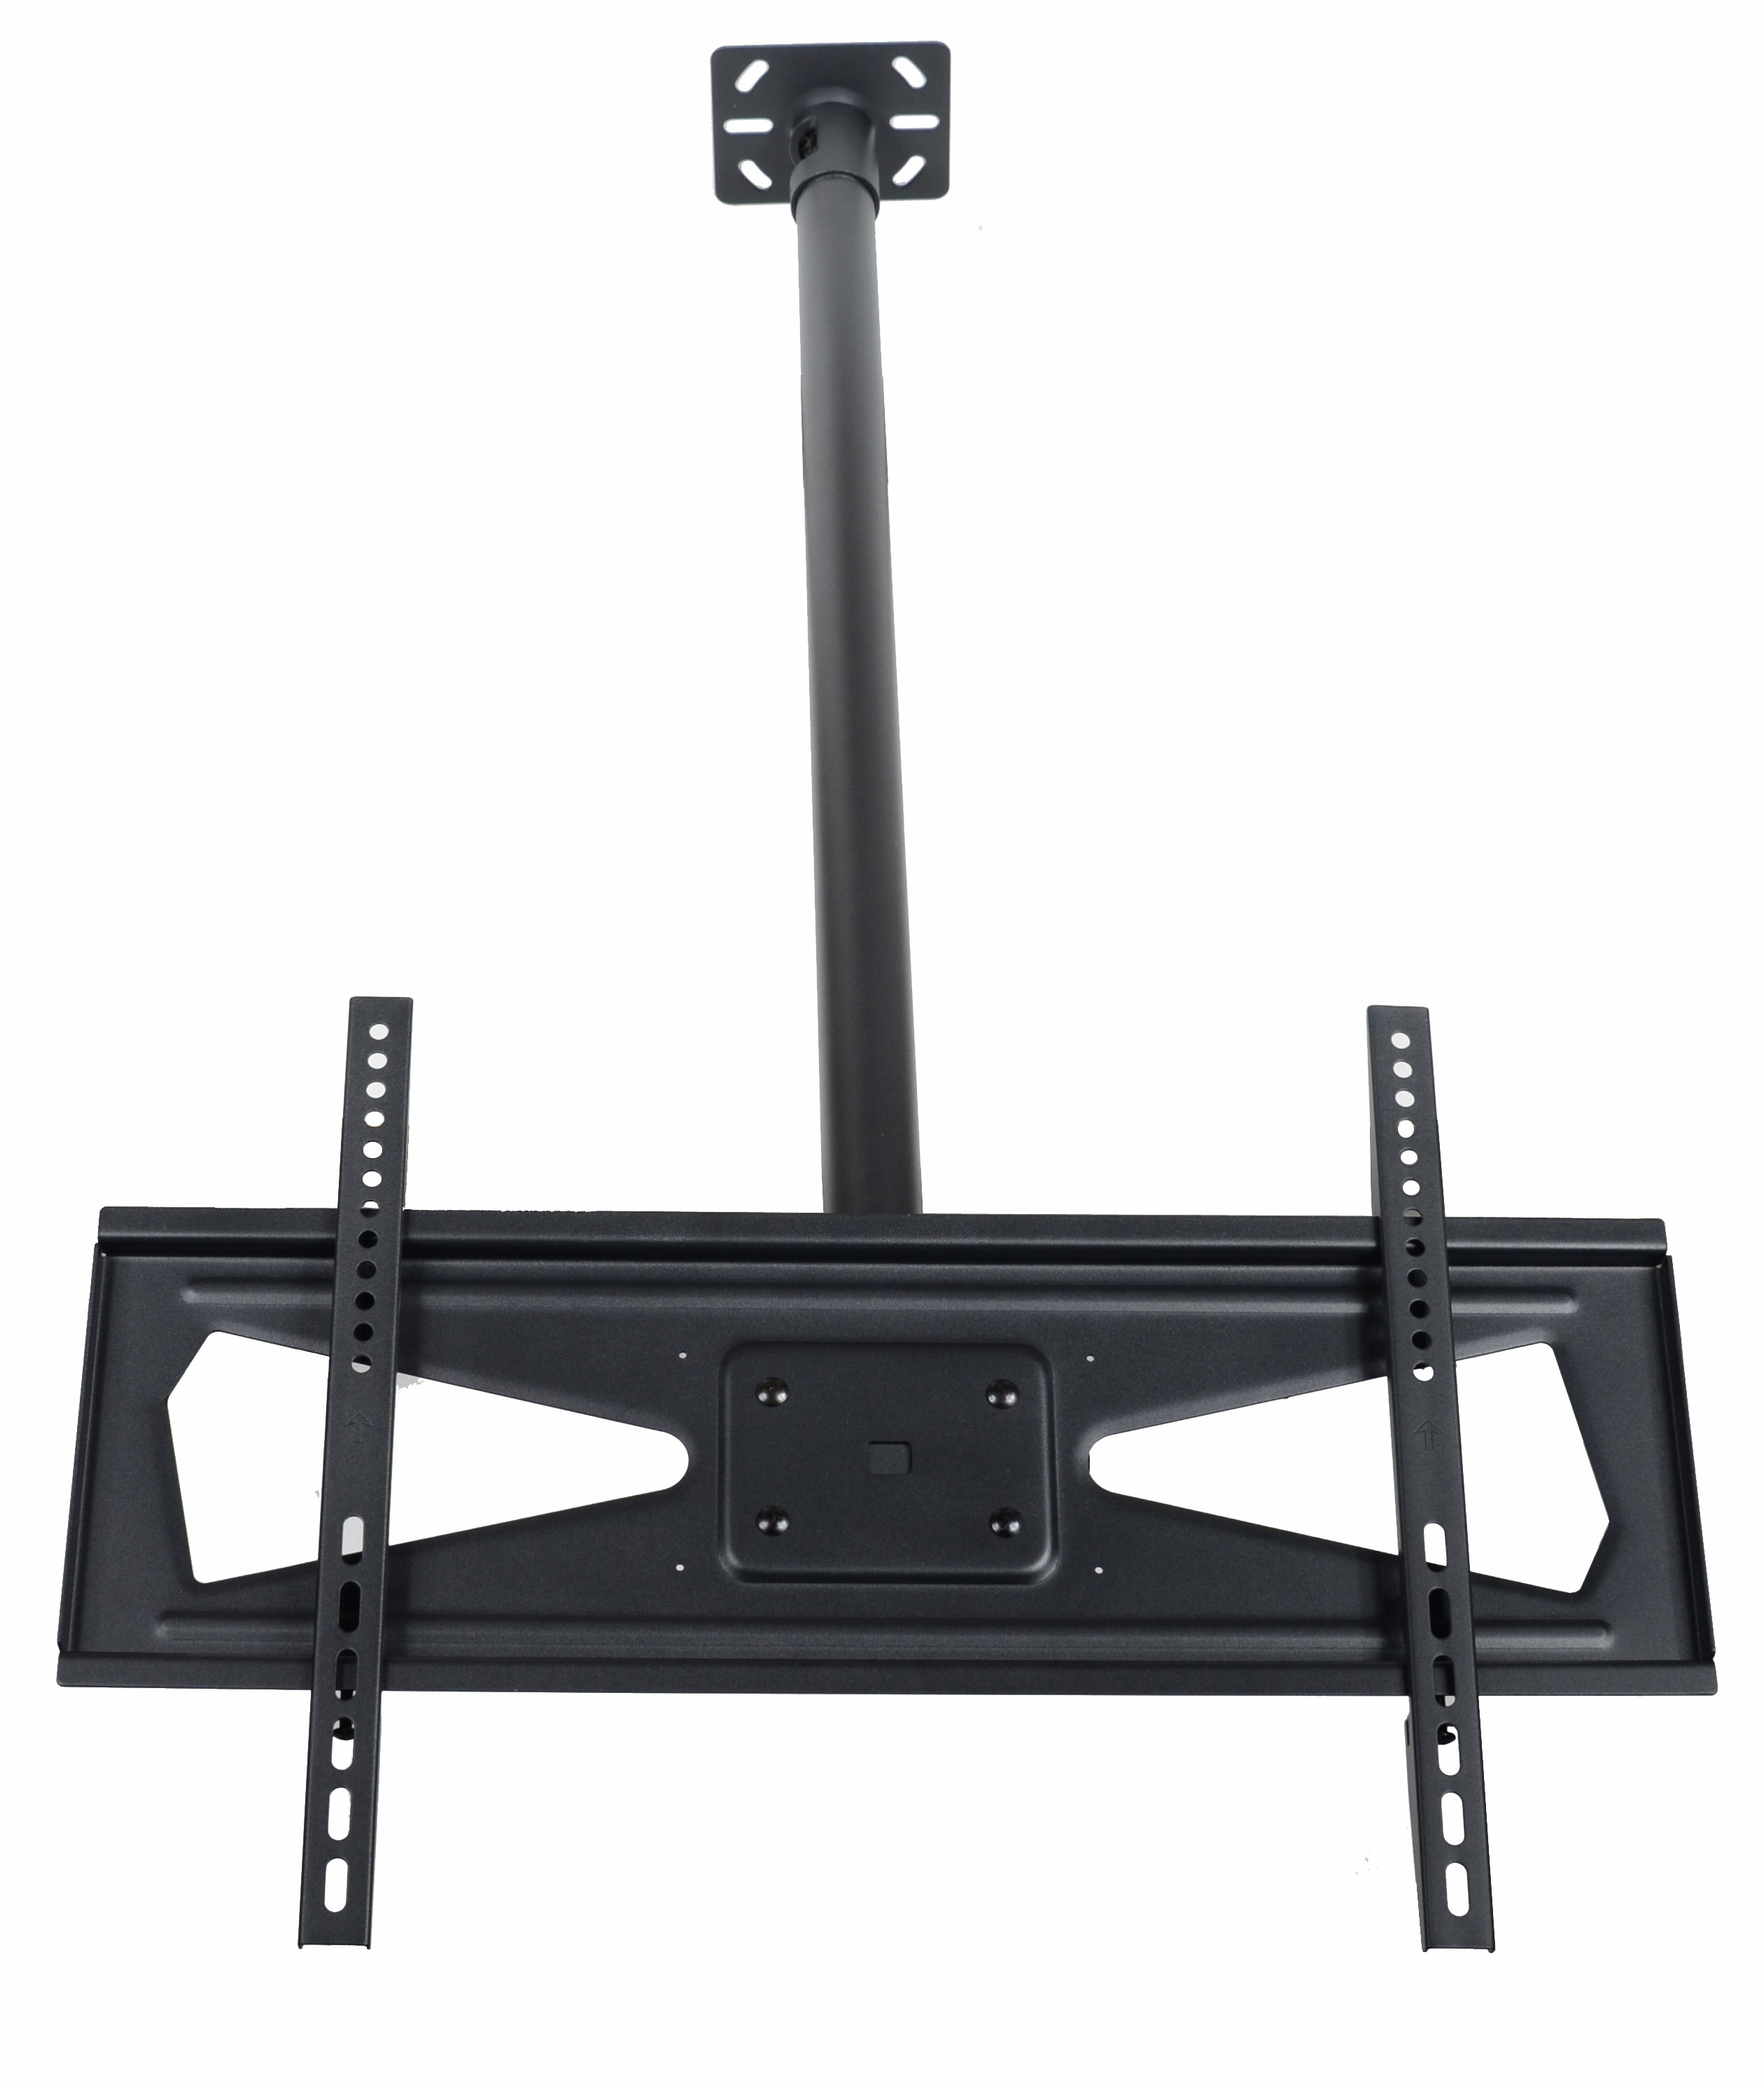 VideoSecu Tilt TV Ceiling Mount for 37 39 40 42 43 46 47 48 50 55 60 65" LCD LED Plasma with 900mm Fixed Height Pole b37 - image 3 of 4